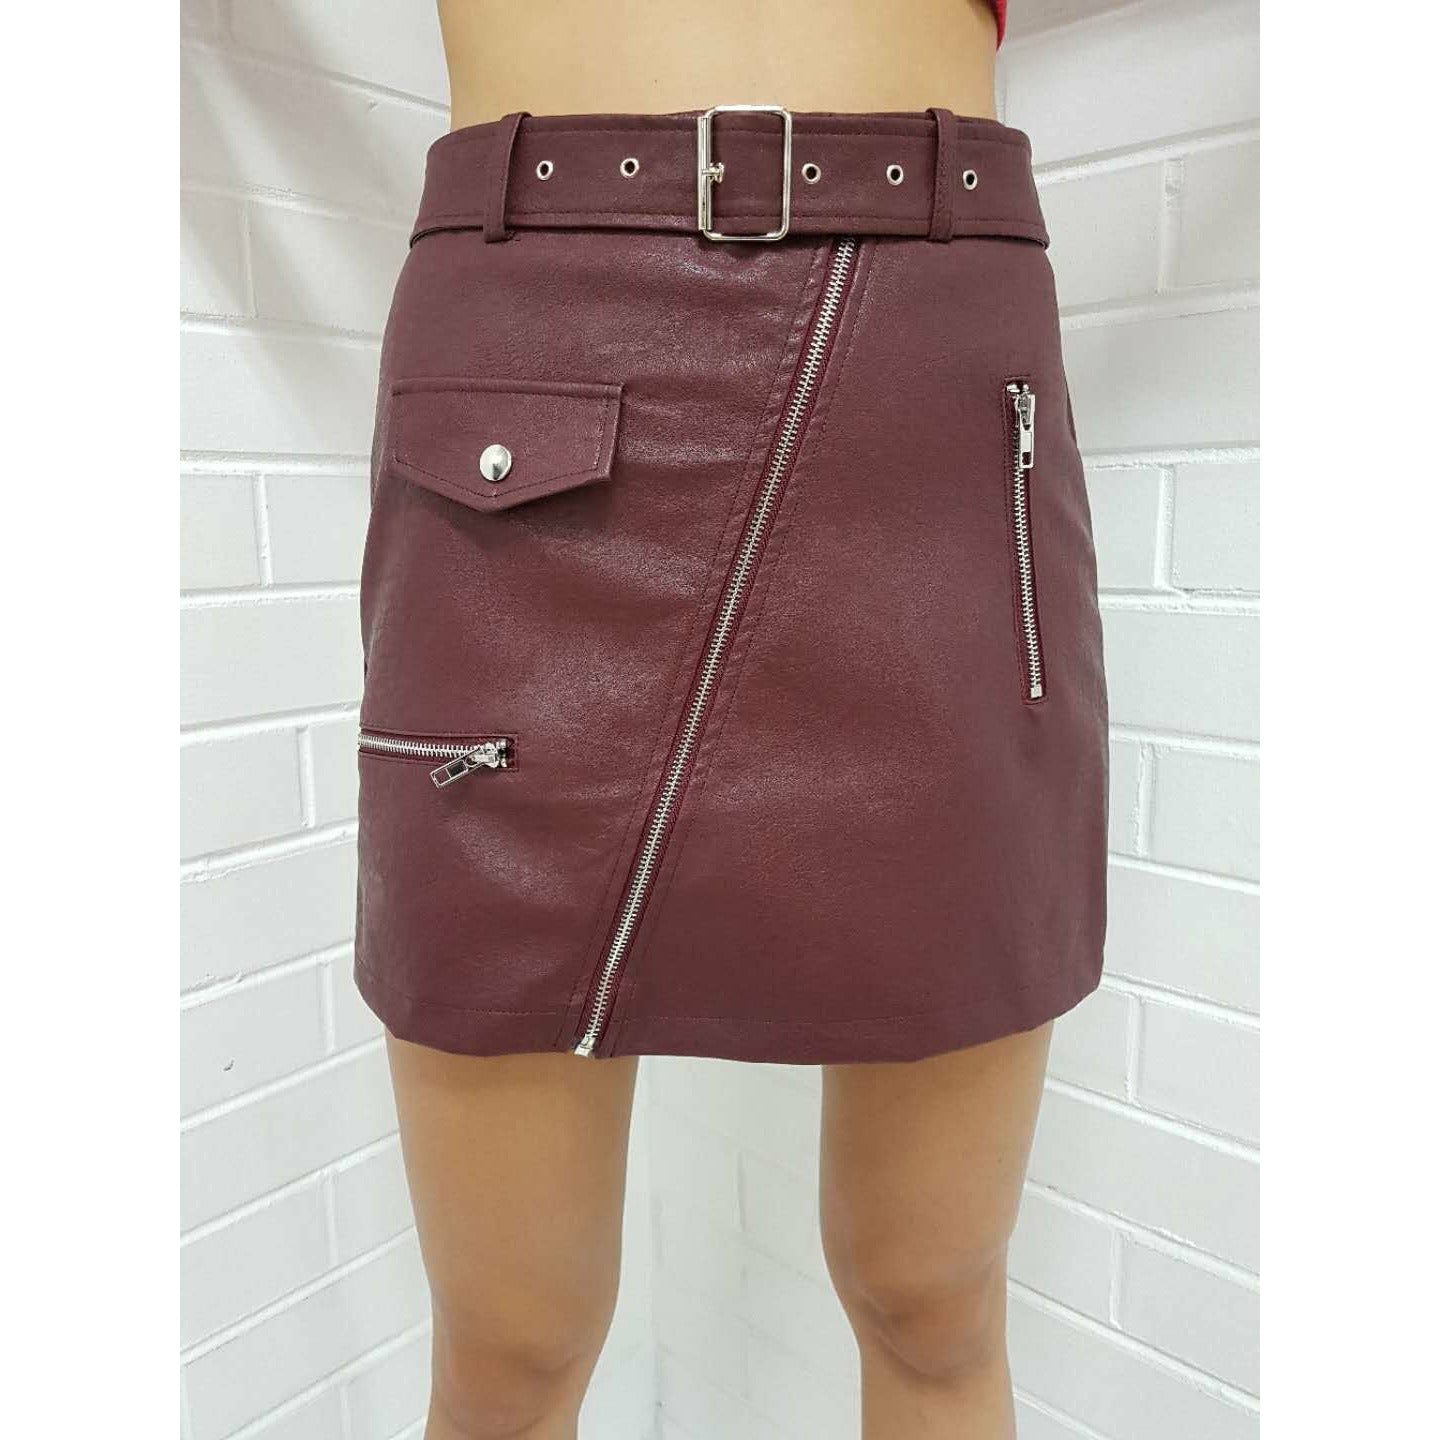 Justice Skirt - Red Not specified